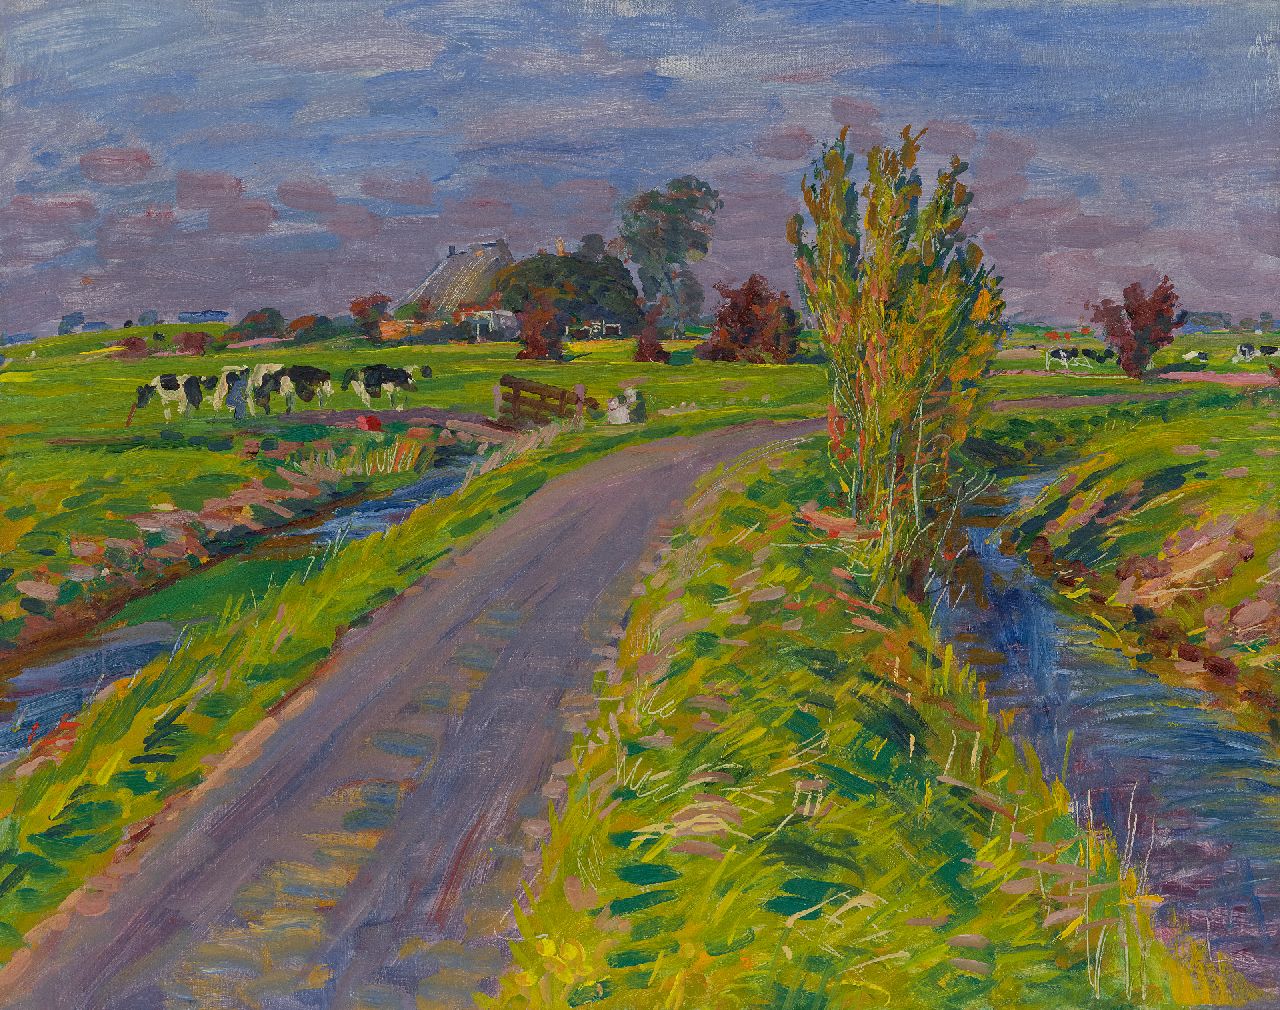 Dijkstra J.  | Johannes 'Johan' Dijkstra | Paintings offered for sale | Farmhouse on the Paddepoelsterweg near Wierumerschouw; on the reverse: Farm on a countryroad, oil on canvas 52.4 x 66.0 cm, painted ca. 1930